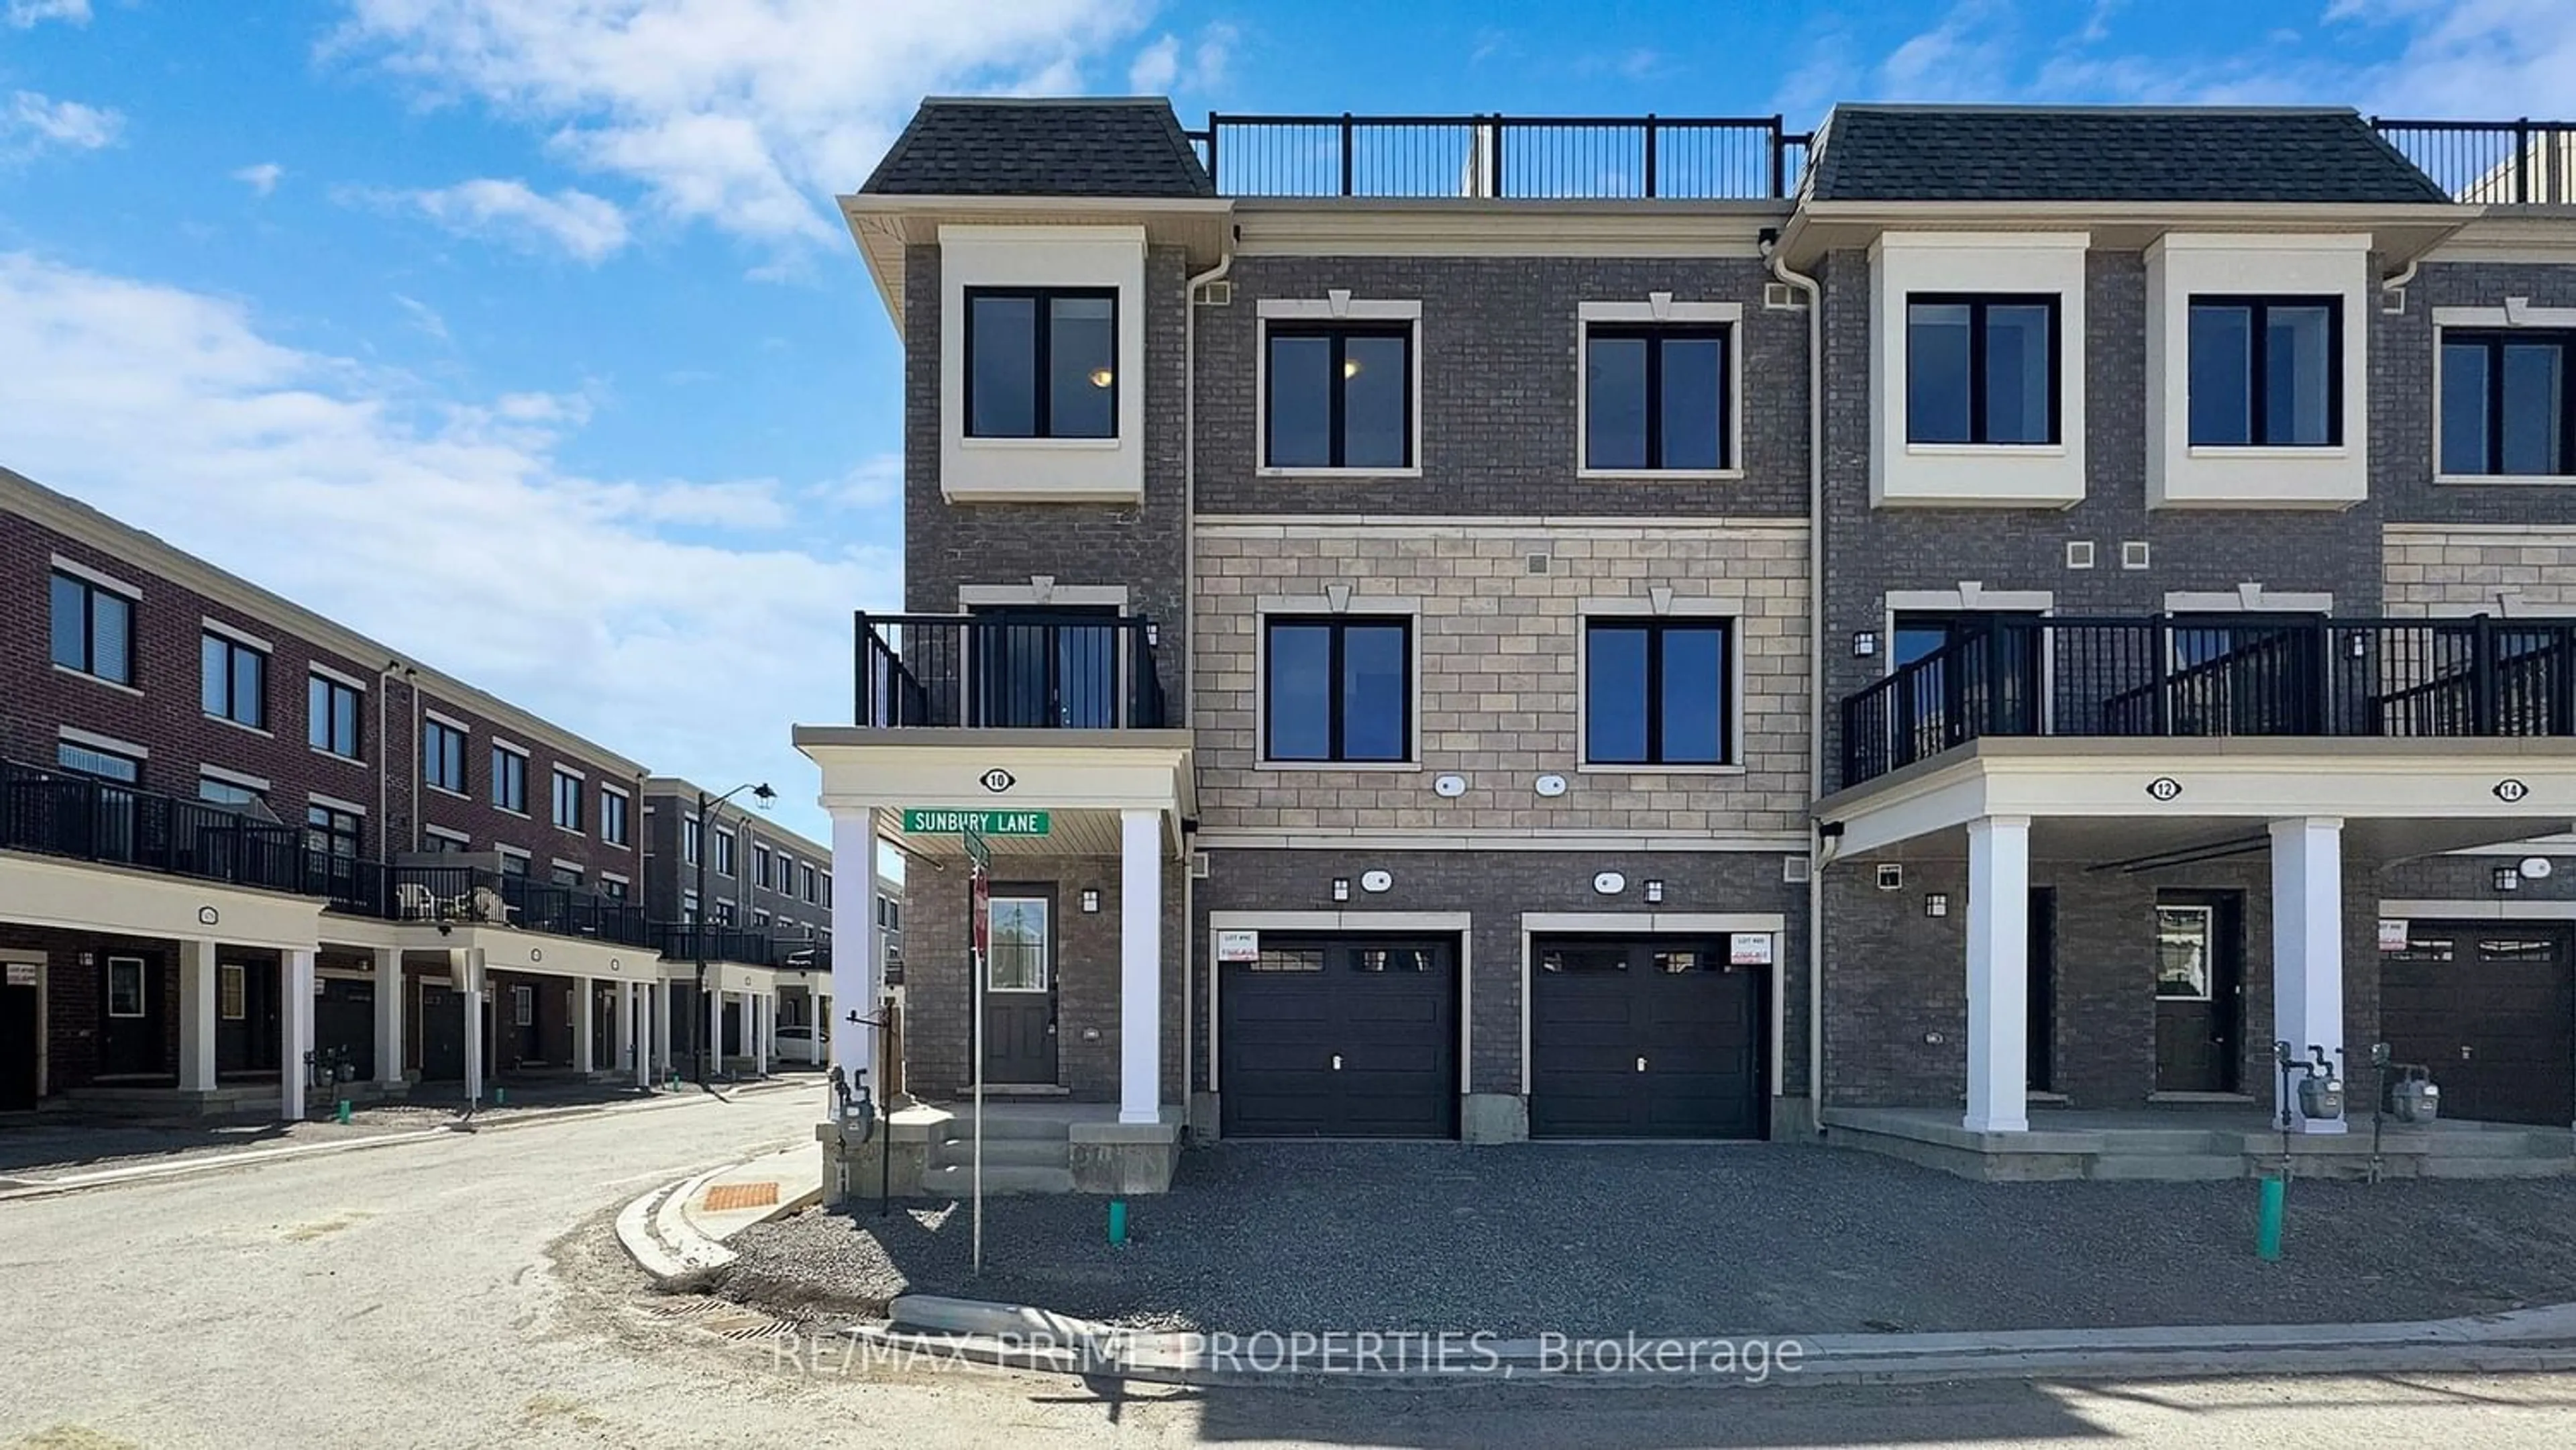 A pic from exterior of the house or condo for 10 Sunbury Lane, Whitchurch-Stouffville Ontario L4A 7X5